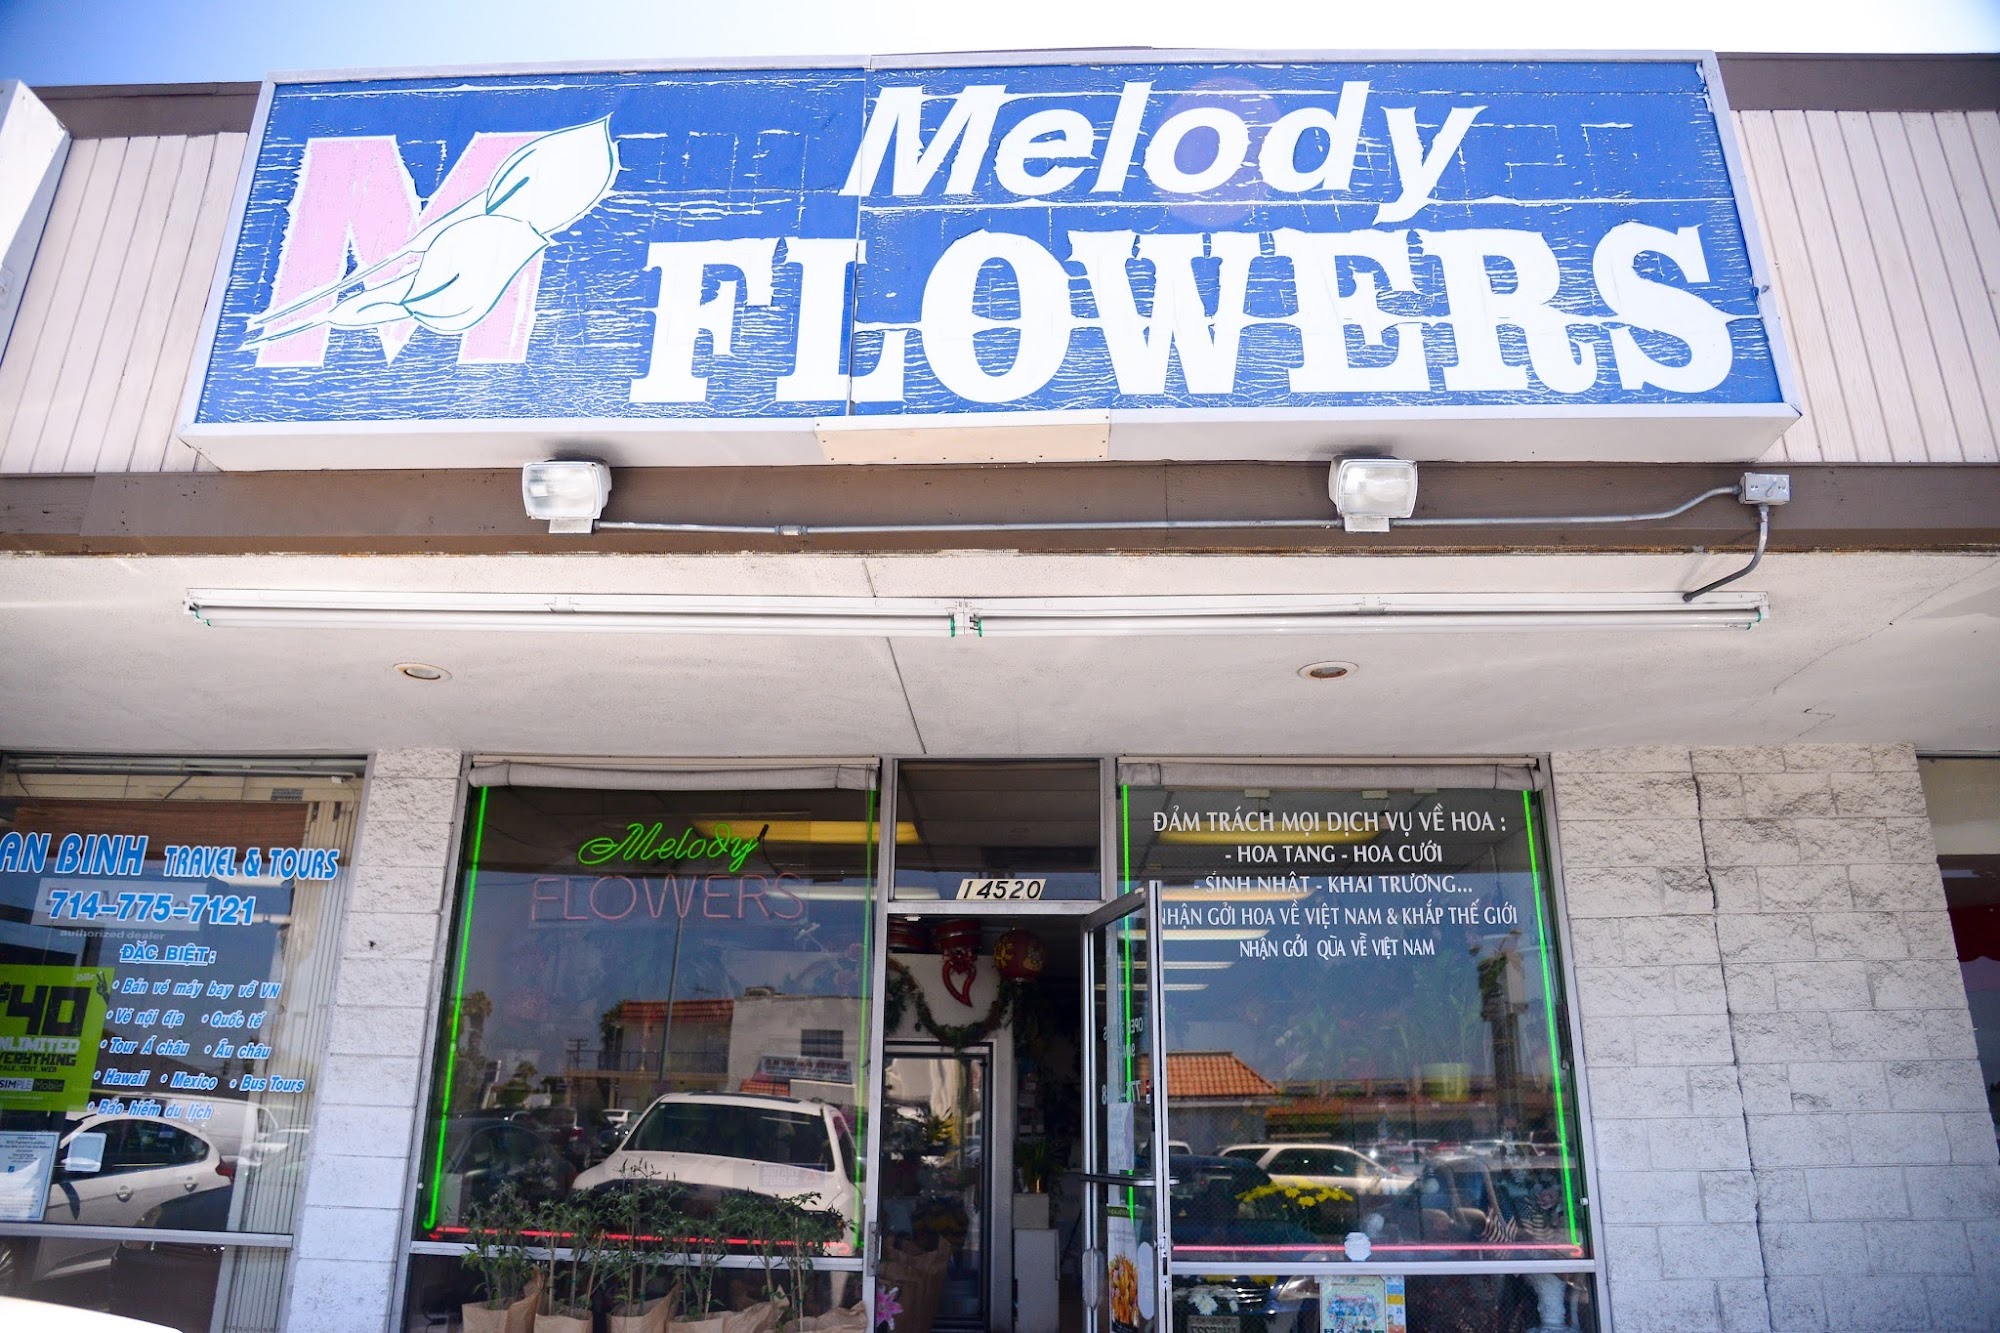 Melody Flowers